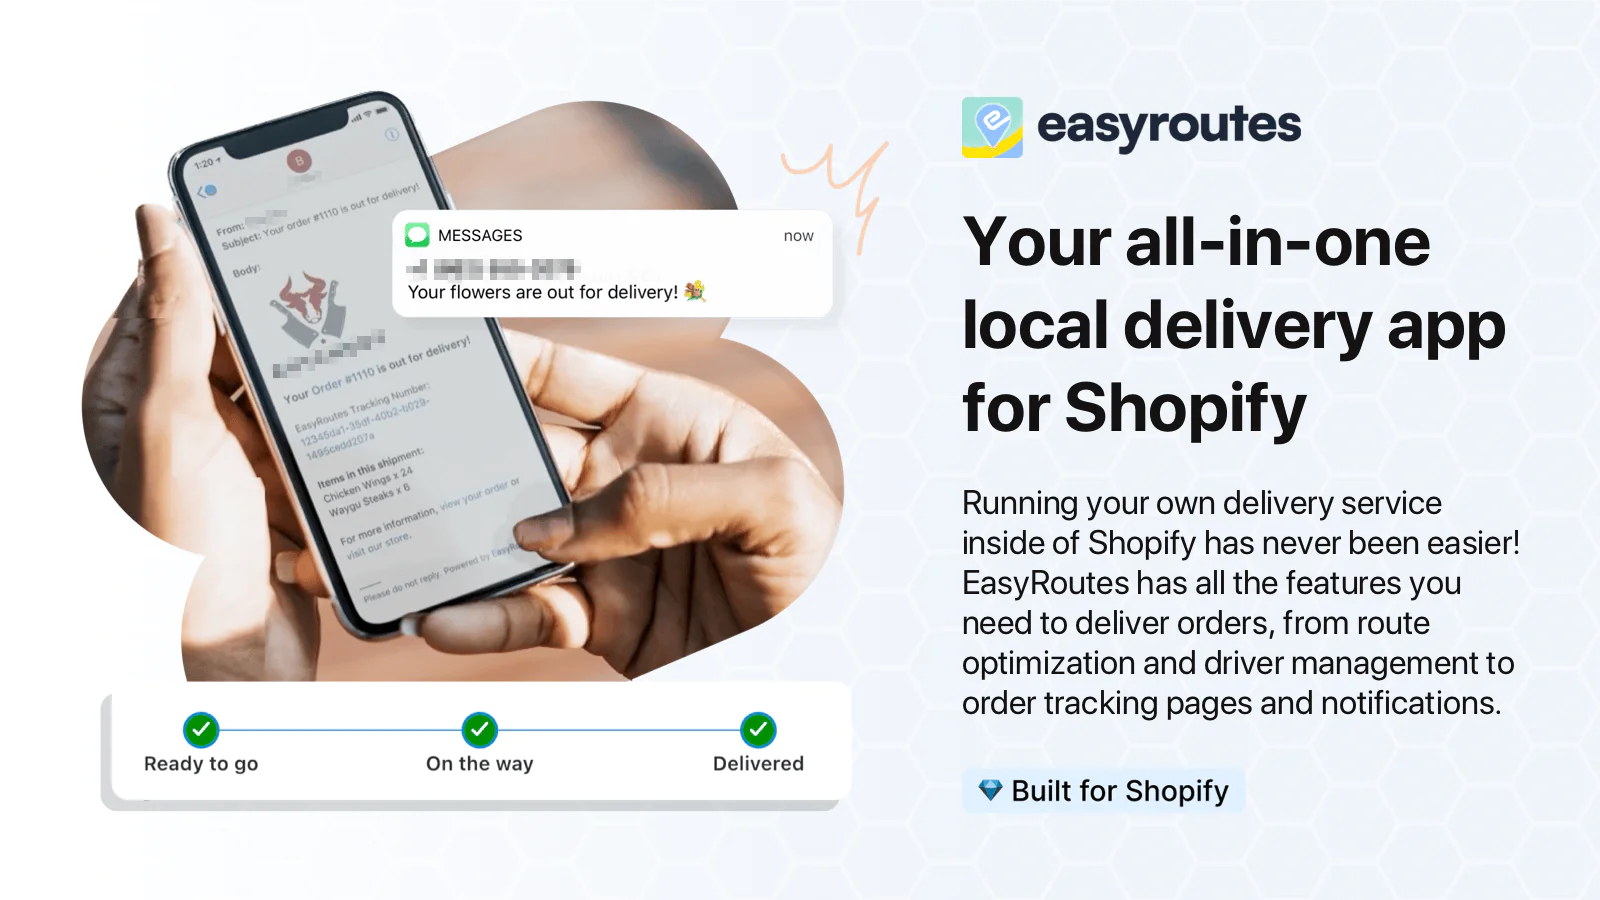 Your all-in-one local delivery app for Shopify